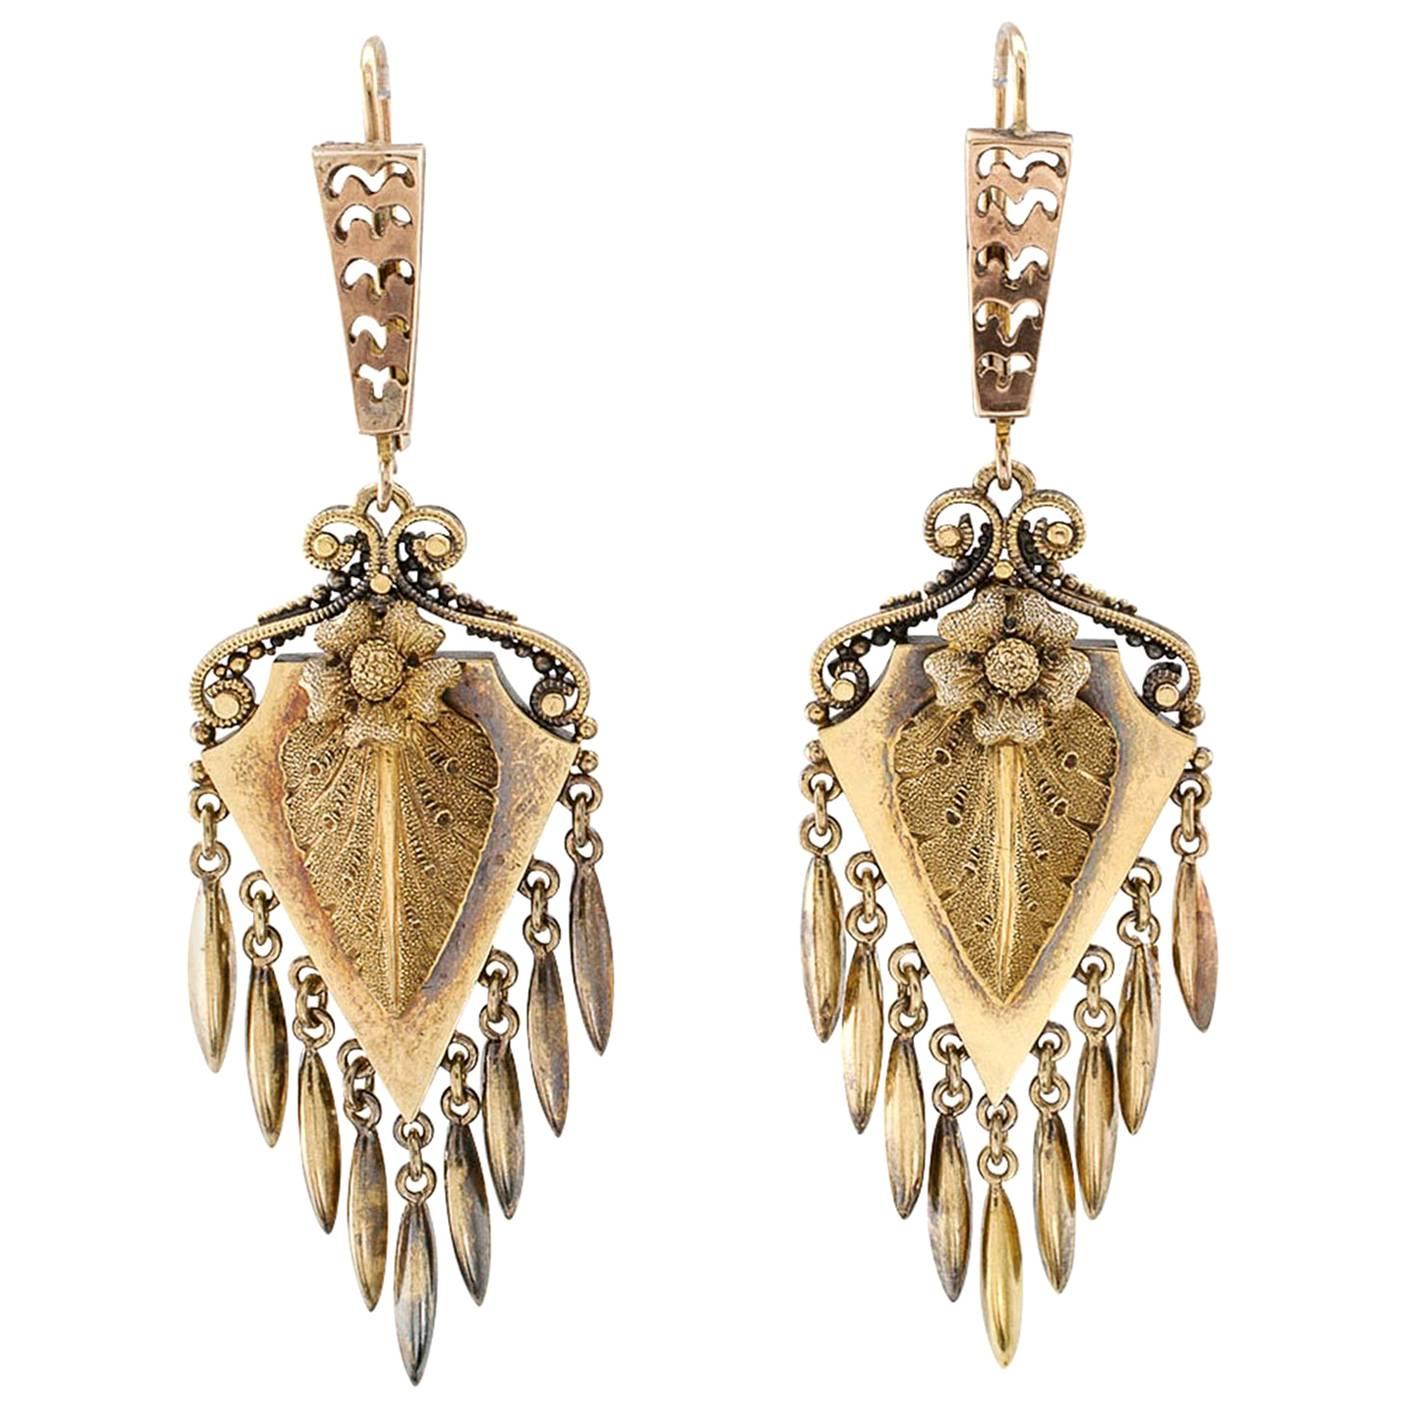 Victorian 1880s Gold Pendent Earrings